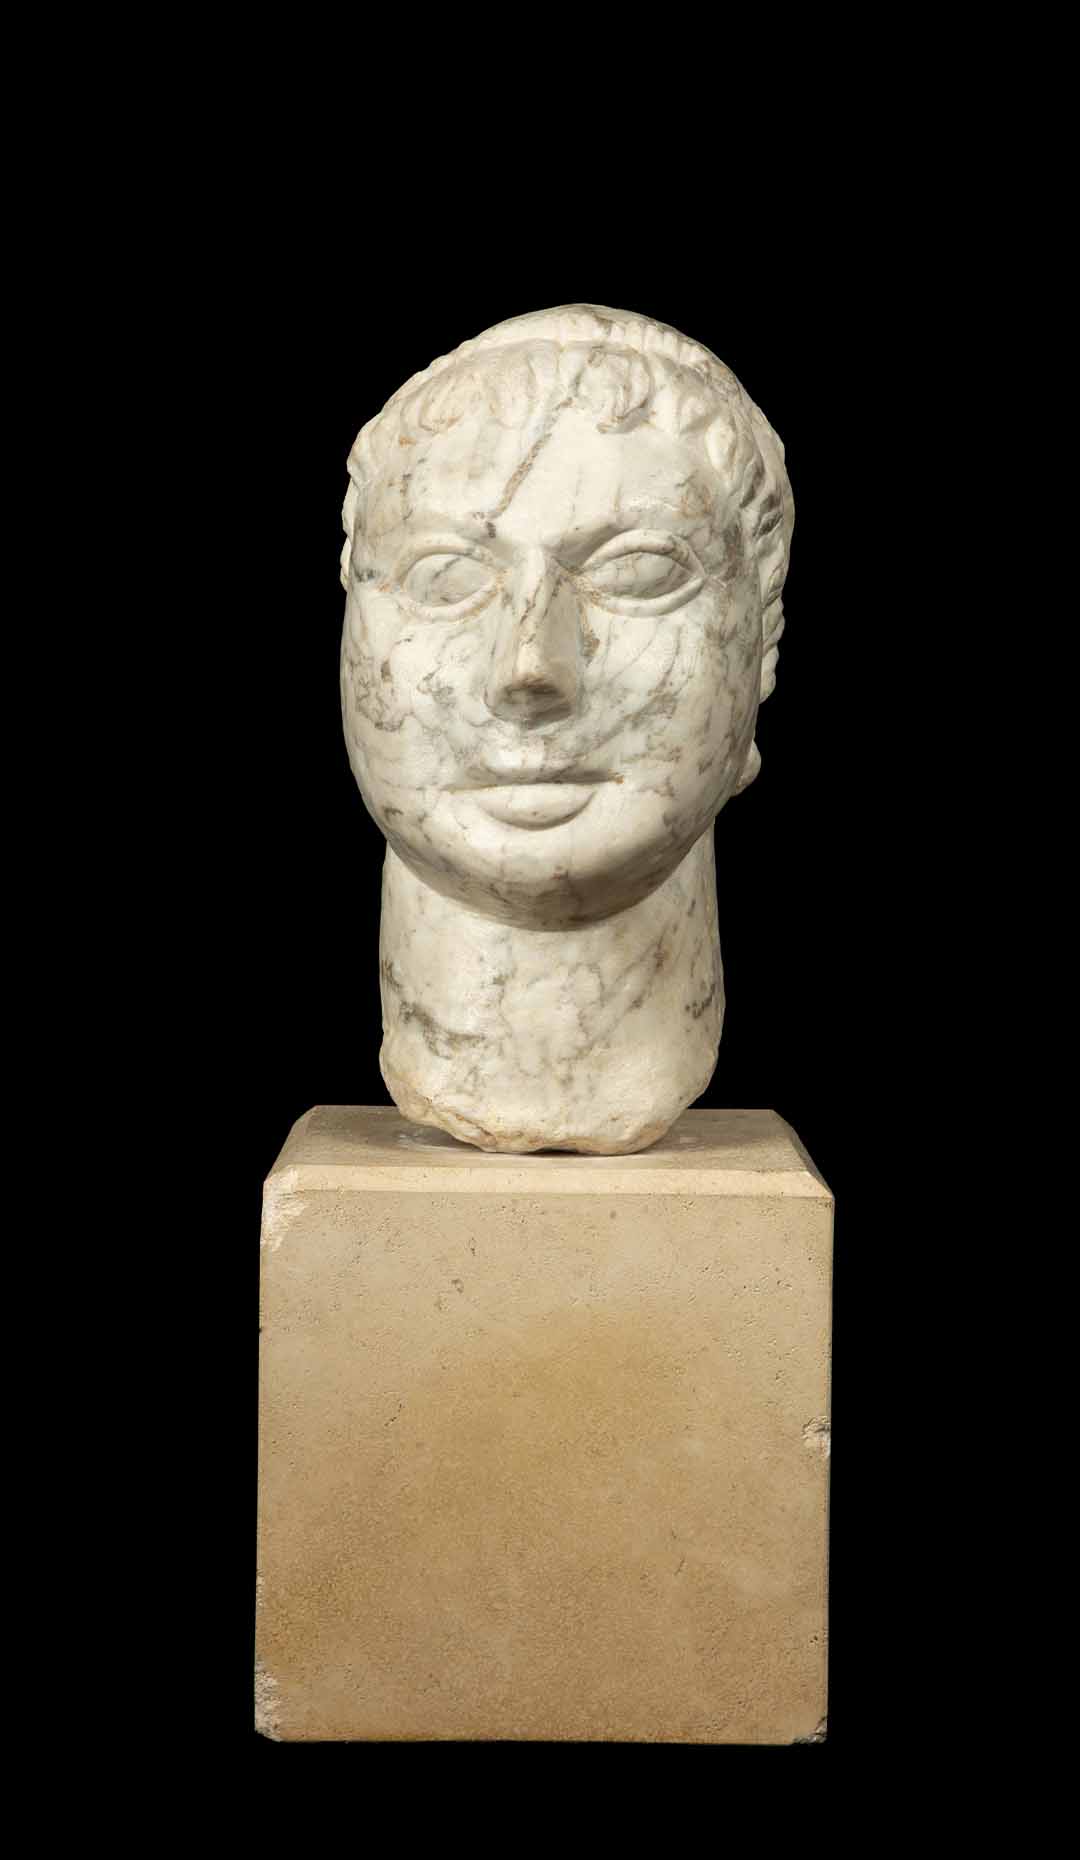 19th C. Carved Head of a man in the antique style, wearing a crown of laurels